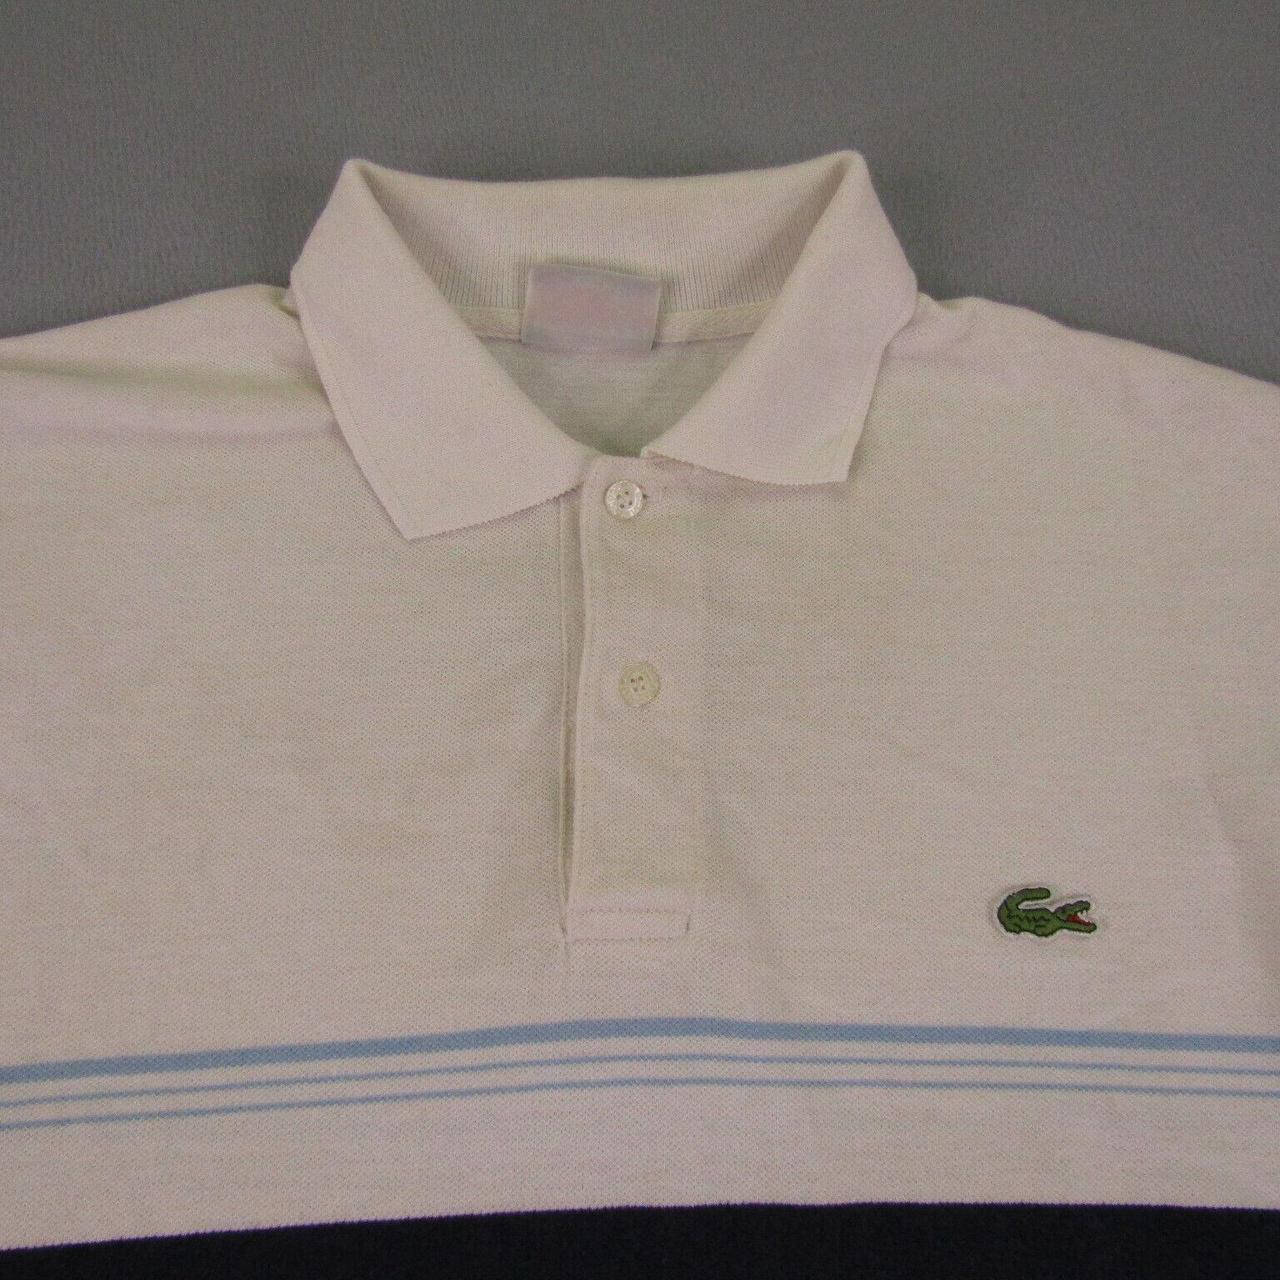 Product Image 3 - Lacoste Polo Shirt Mens XL